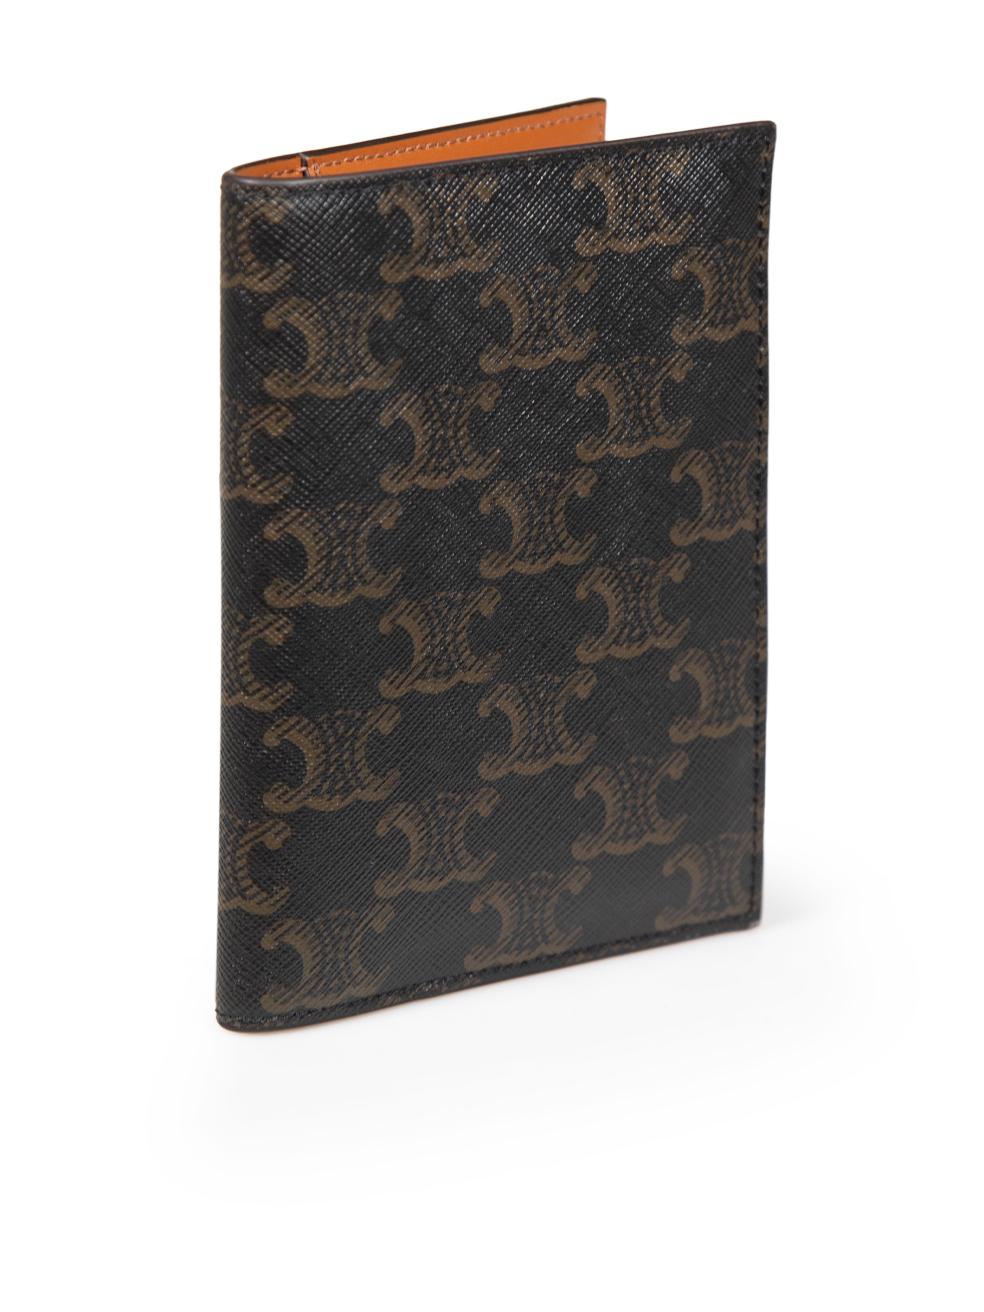 CONDITION is Never worn. No visible wear to the passport cover is evident on this new Céline designer resale item. This item comes with an original dust bag.
 
 
 
 Details
 
 
 Brown
 
 Coated canvas
 
 Passport cover
 
 Triomphe pattern
 
